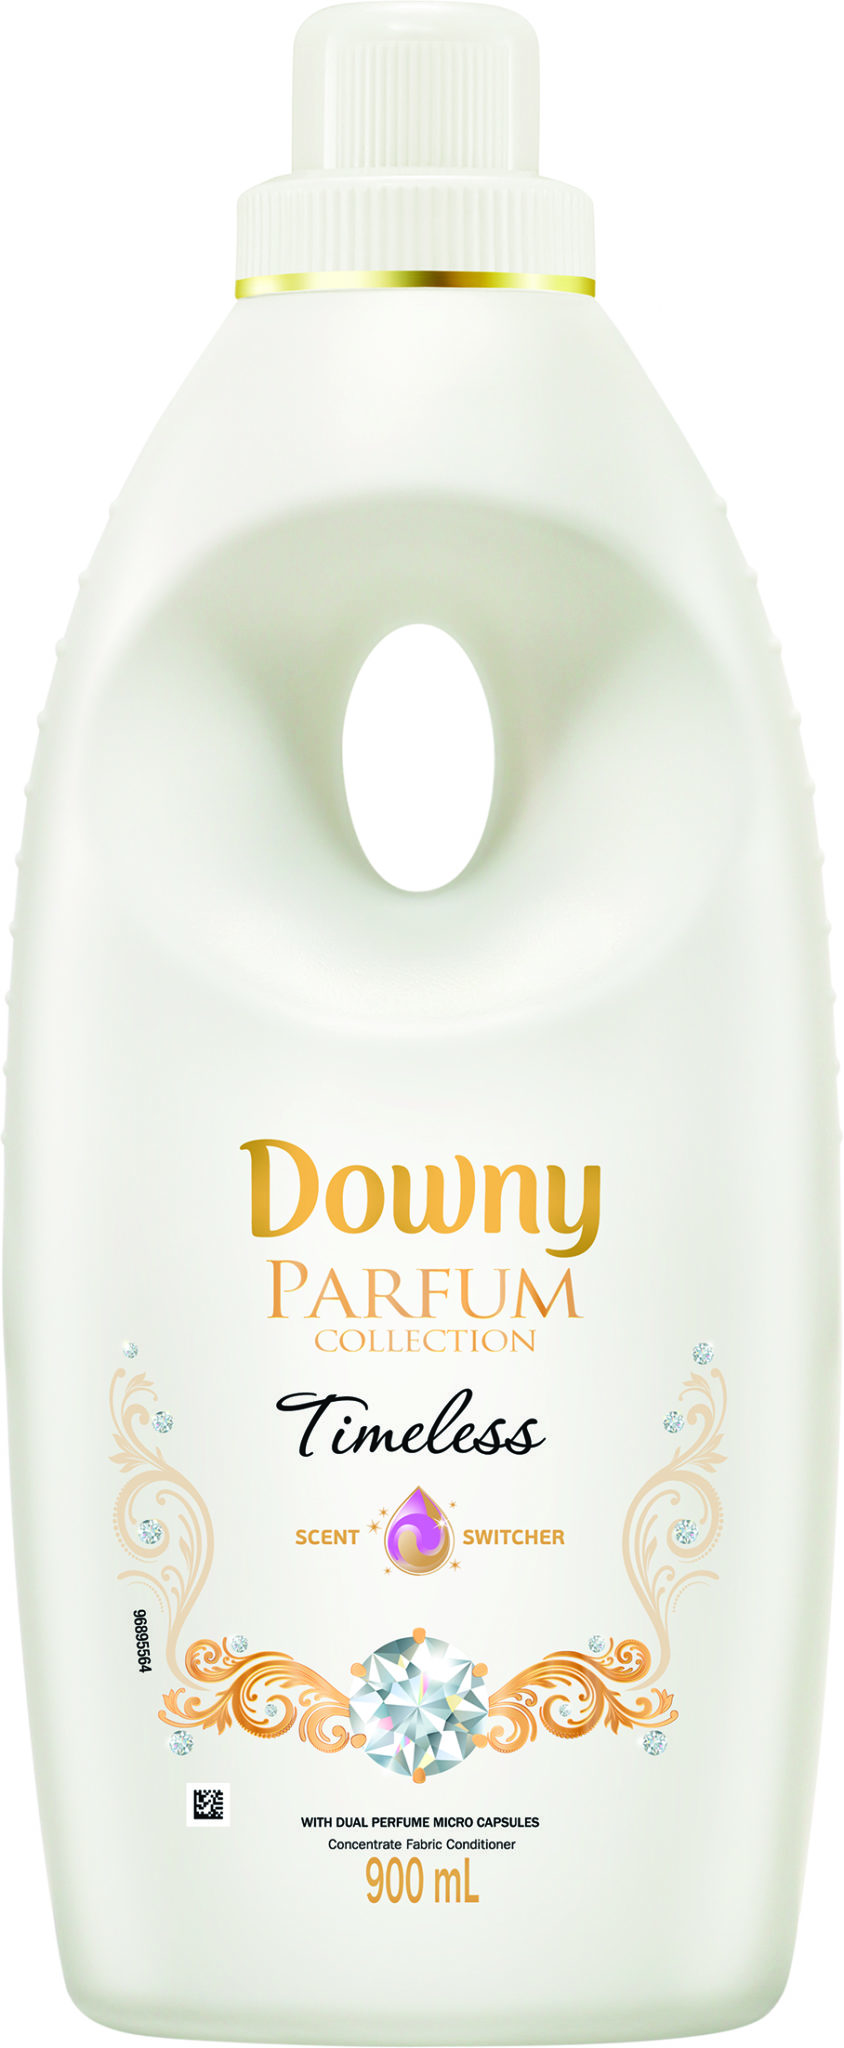 Downy Pays Tribute to Mothers on Mother’s Day